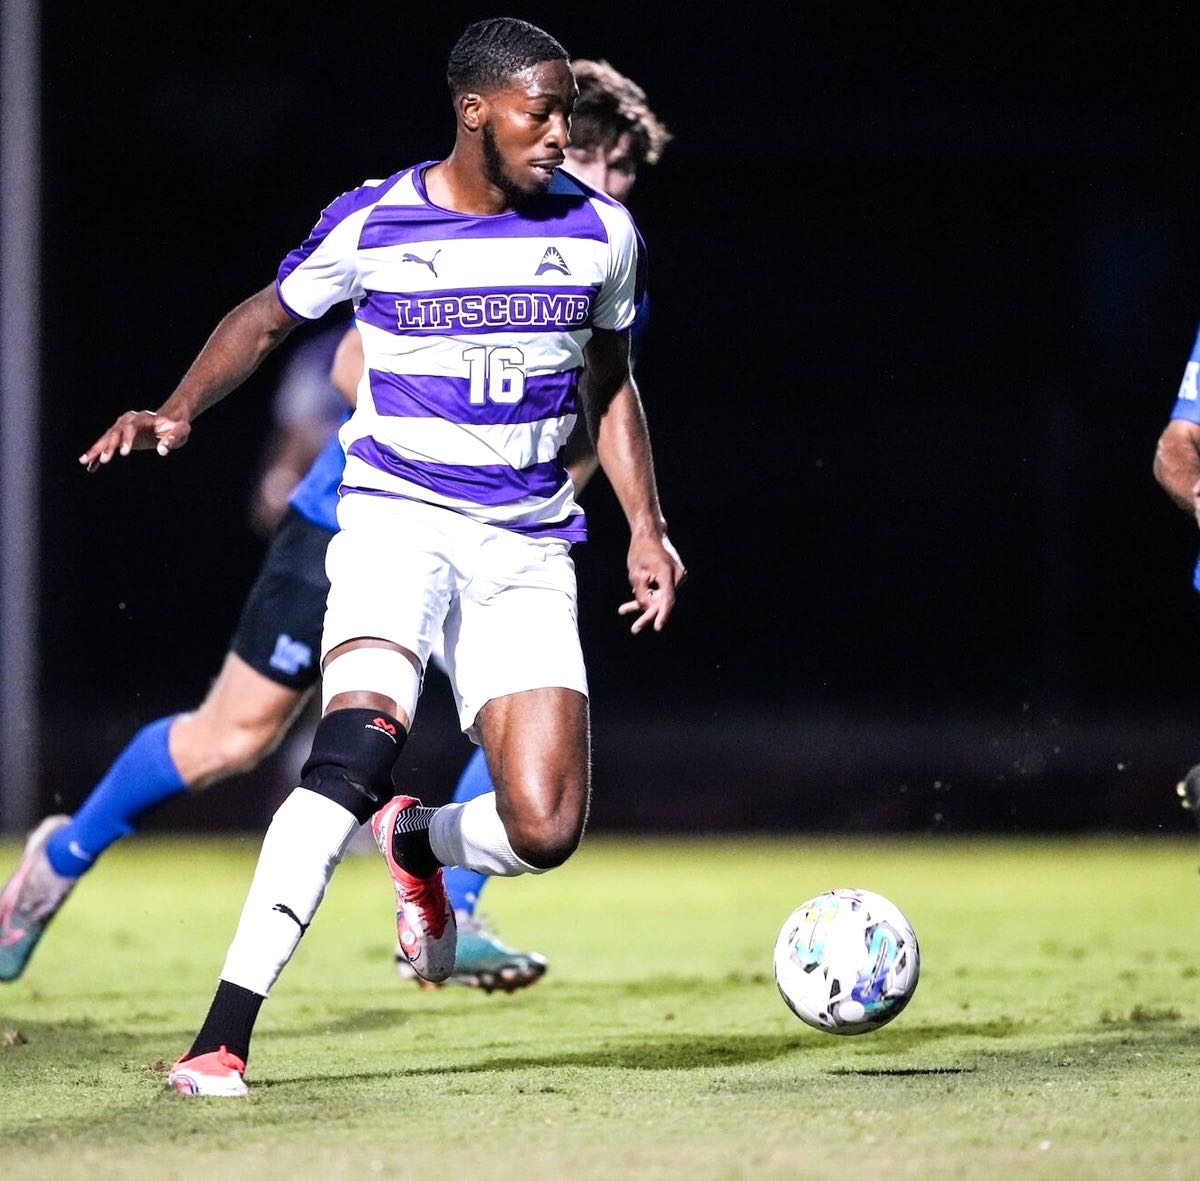 Trinidad and Tobago's Tyrese Spicer named top MLS draft pick.